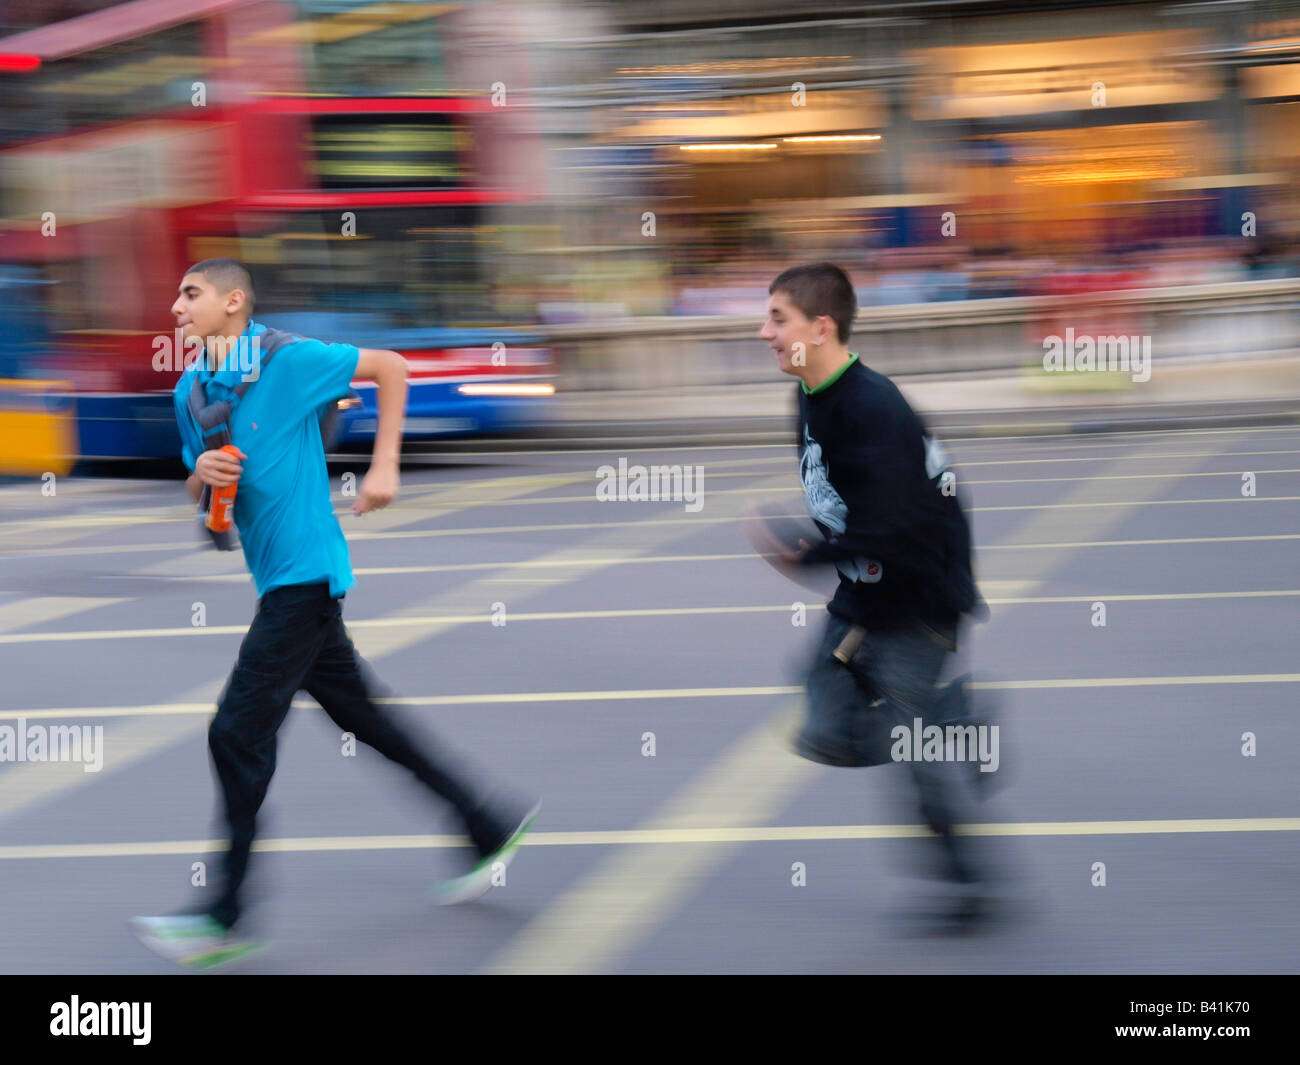 Boys chasing each other running across Oxford Circus London UK Stock Photo